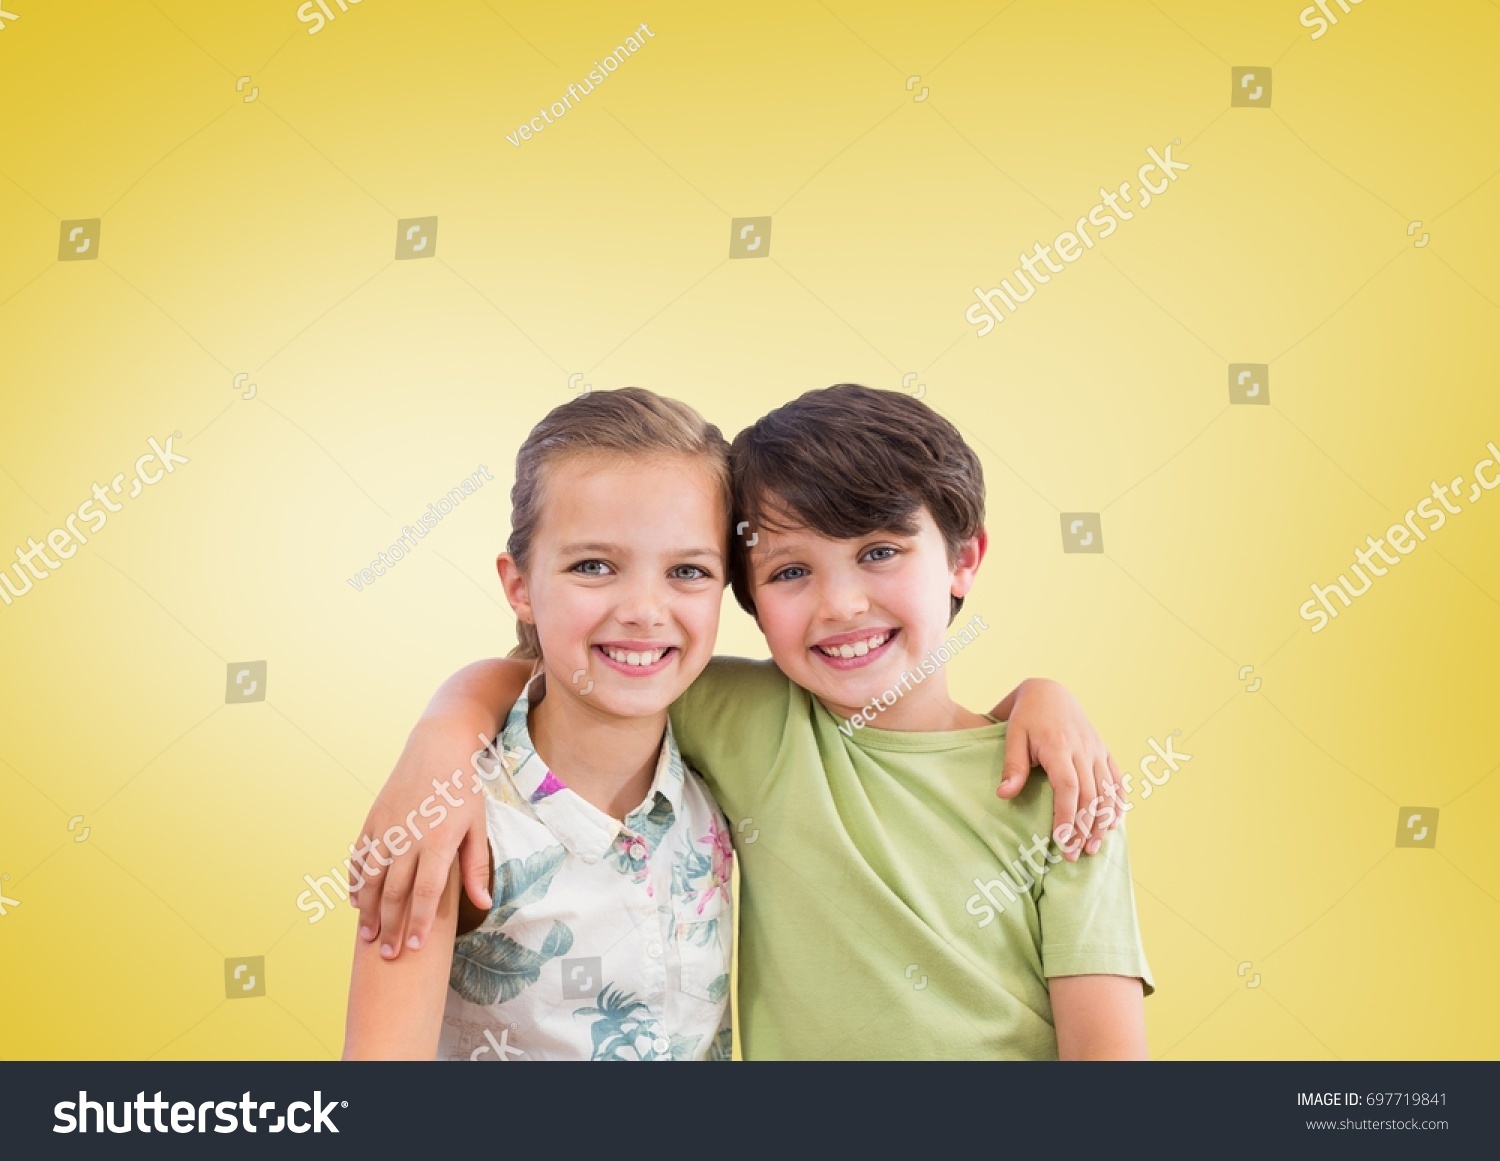 Digital composite of Boy and girl hugging in front of yellow background #697719841